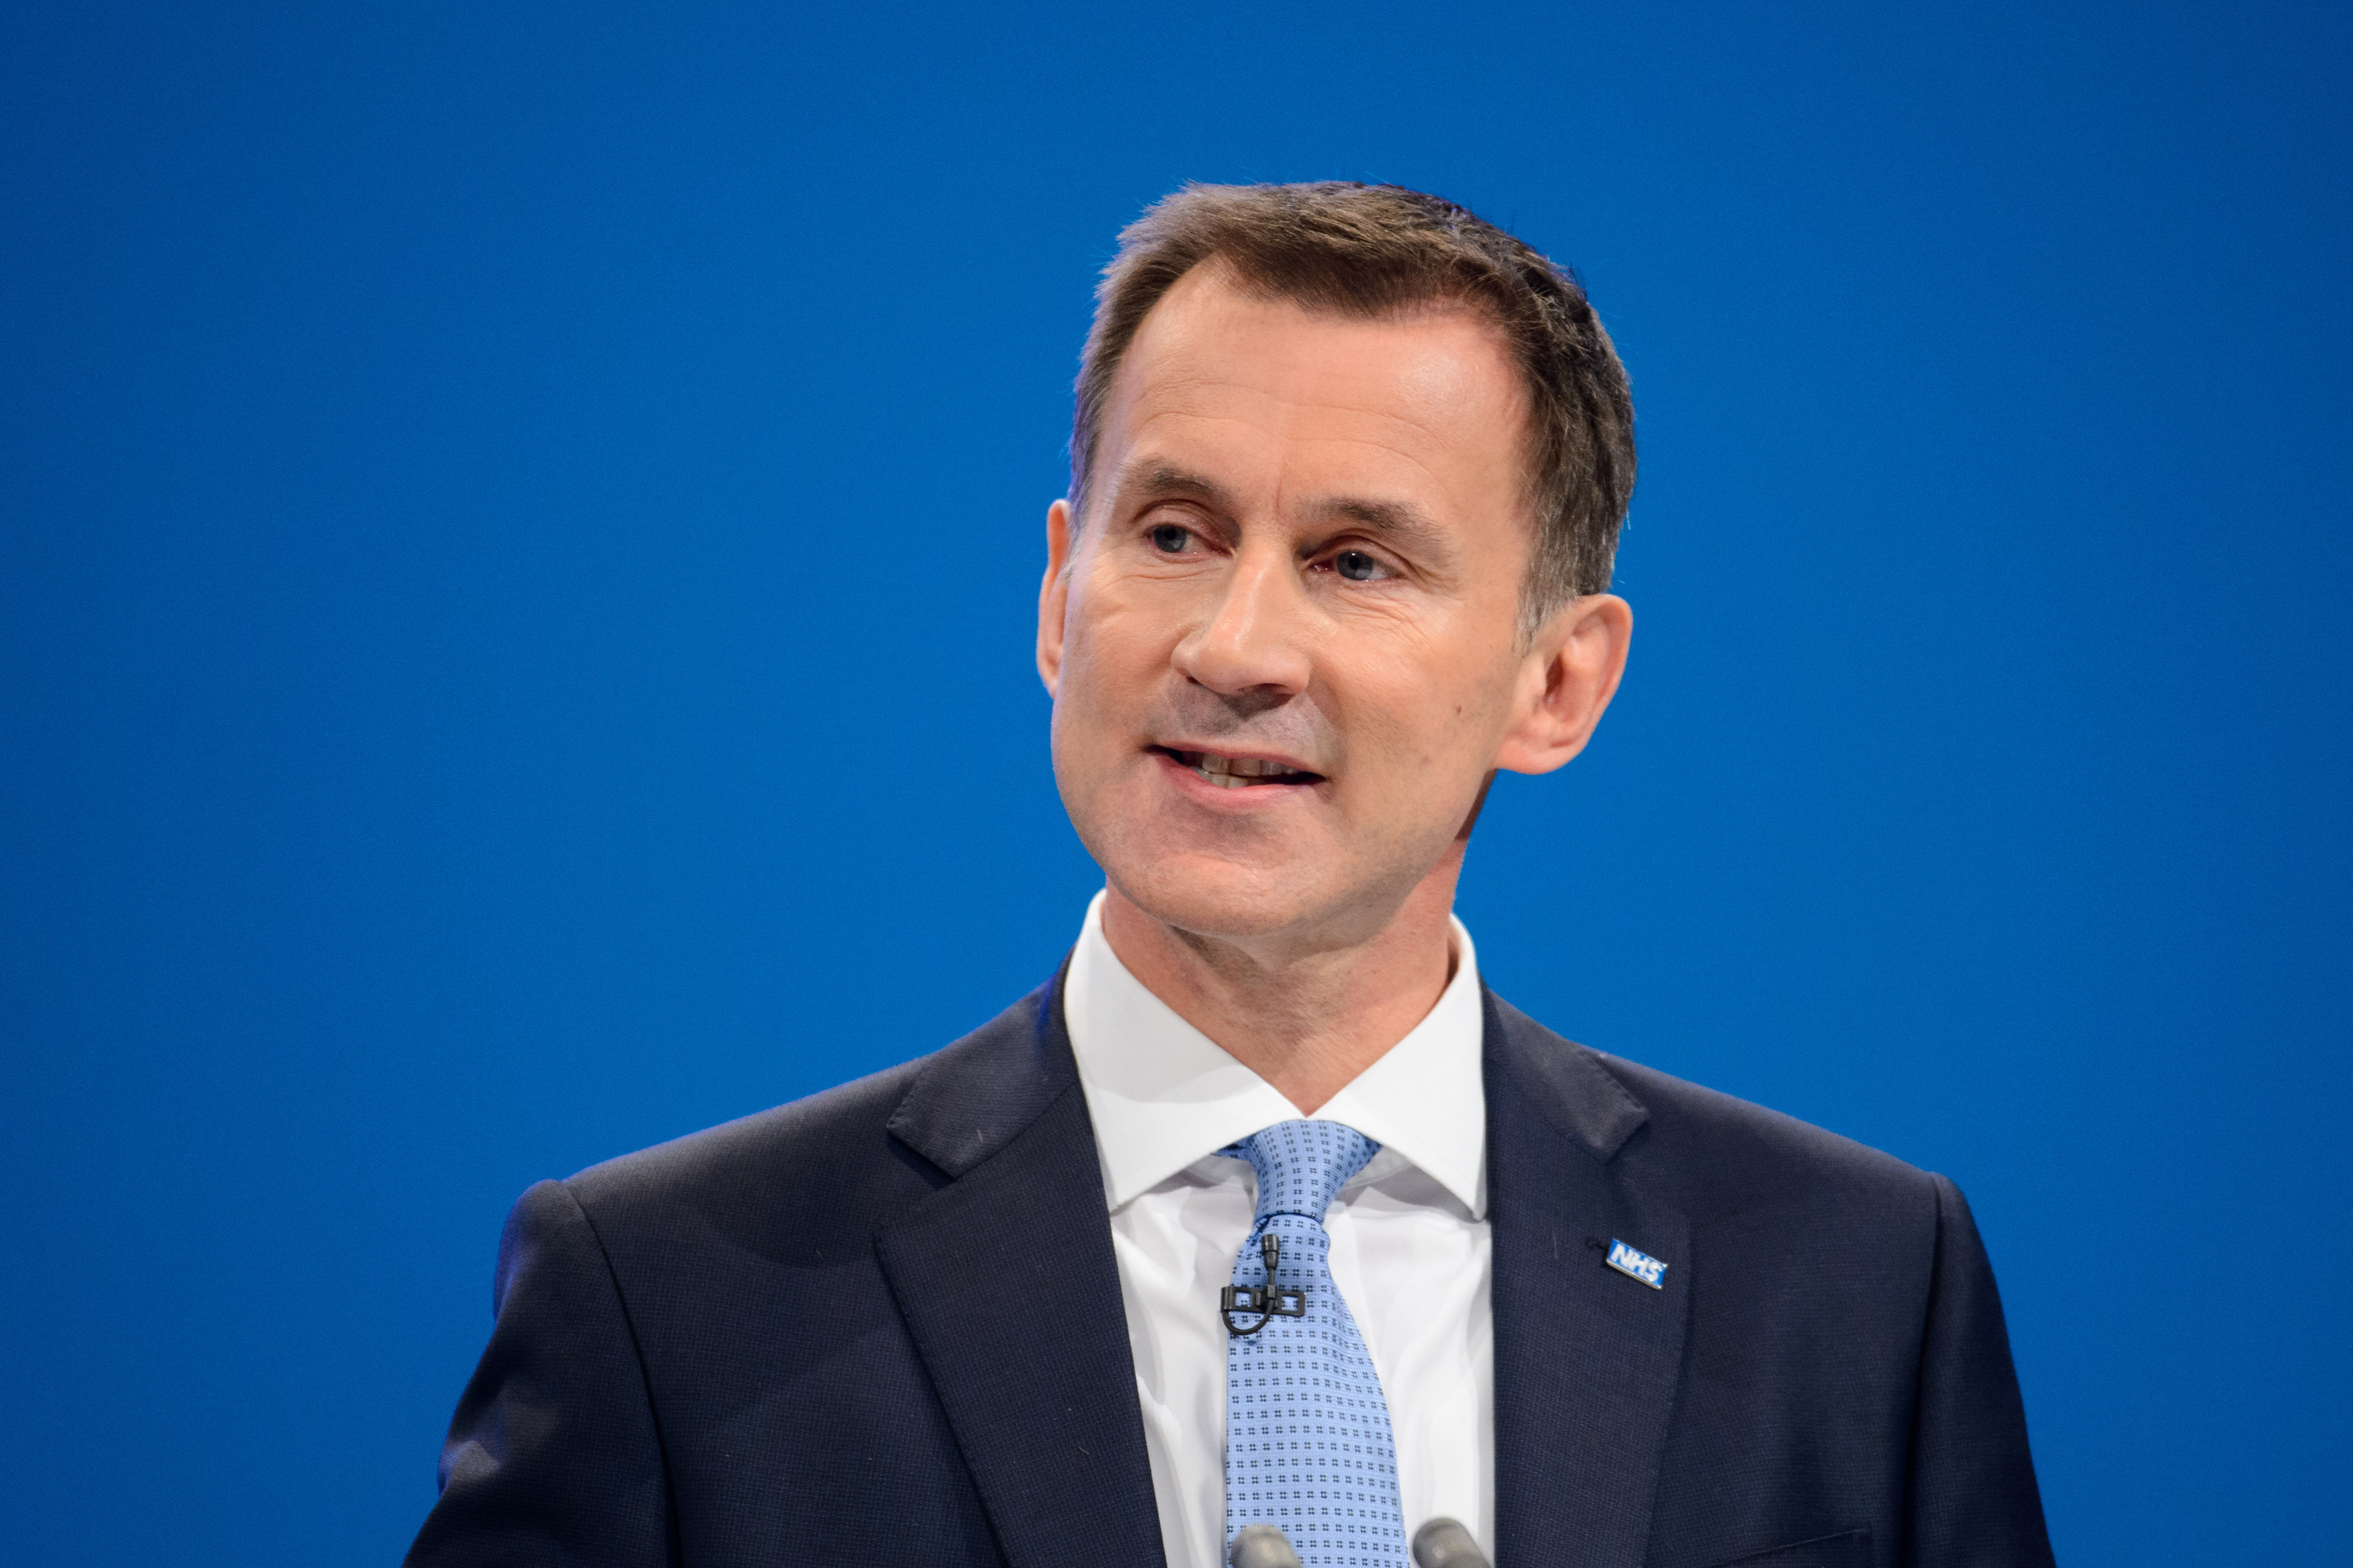 <strong>The Department of Health, of which Jeremy Hunt is Secretary of State, pointed to figures showing that more nurses are on wards this year compared to last year.</strong>